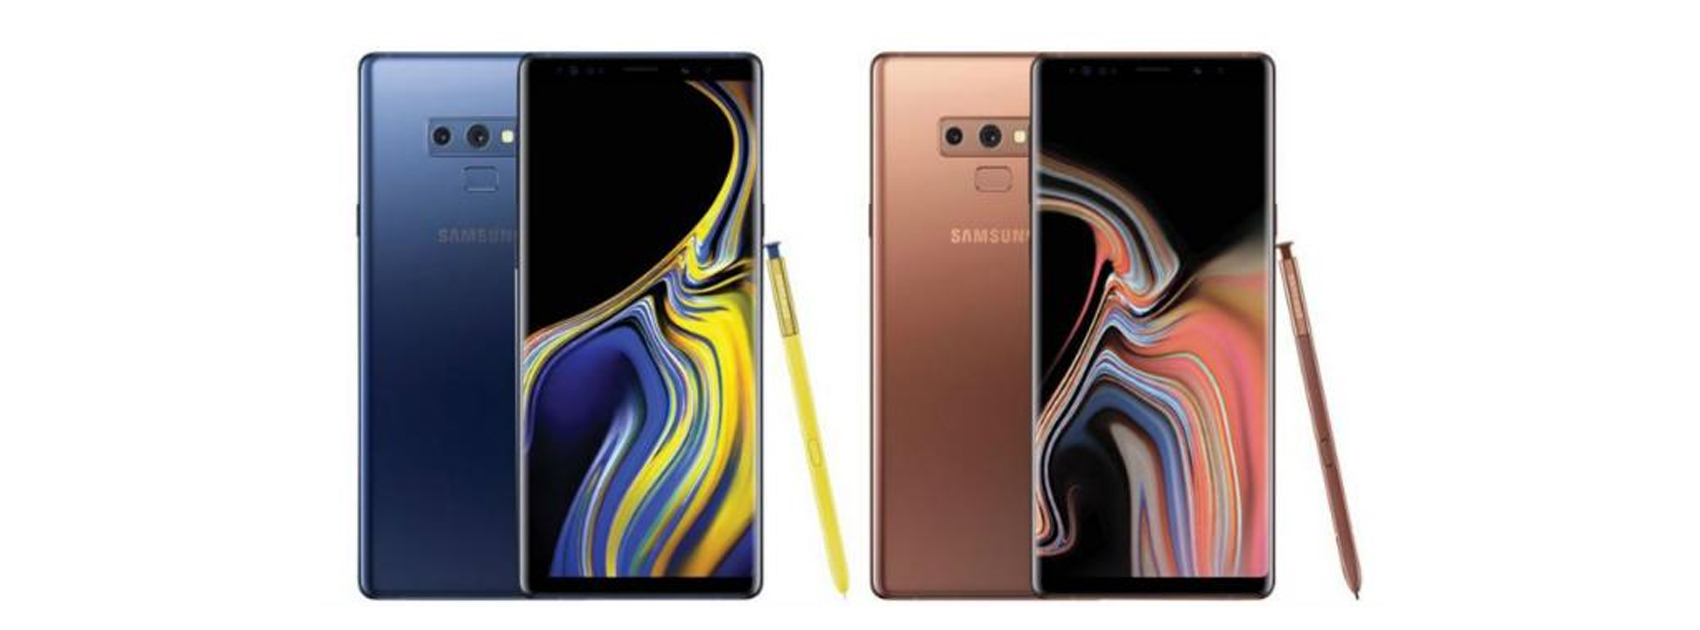 Samsung Galaxy Note 9,Startup Stories,Startup News India,Technology News 2018,Samsung Galaxy Note 9 Price,Samsung Galaxy Note 9 Specifications,Samsung Galaxy Note 9 Features,Samsung Galaxy Note 9 Latest Leaks,Galaxy Note 9 Release Date